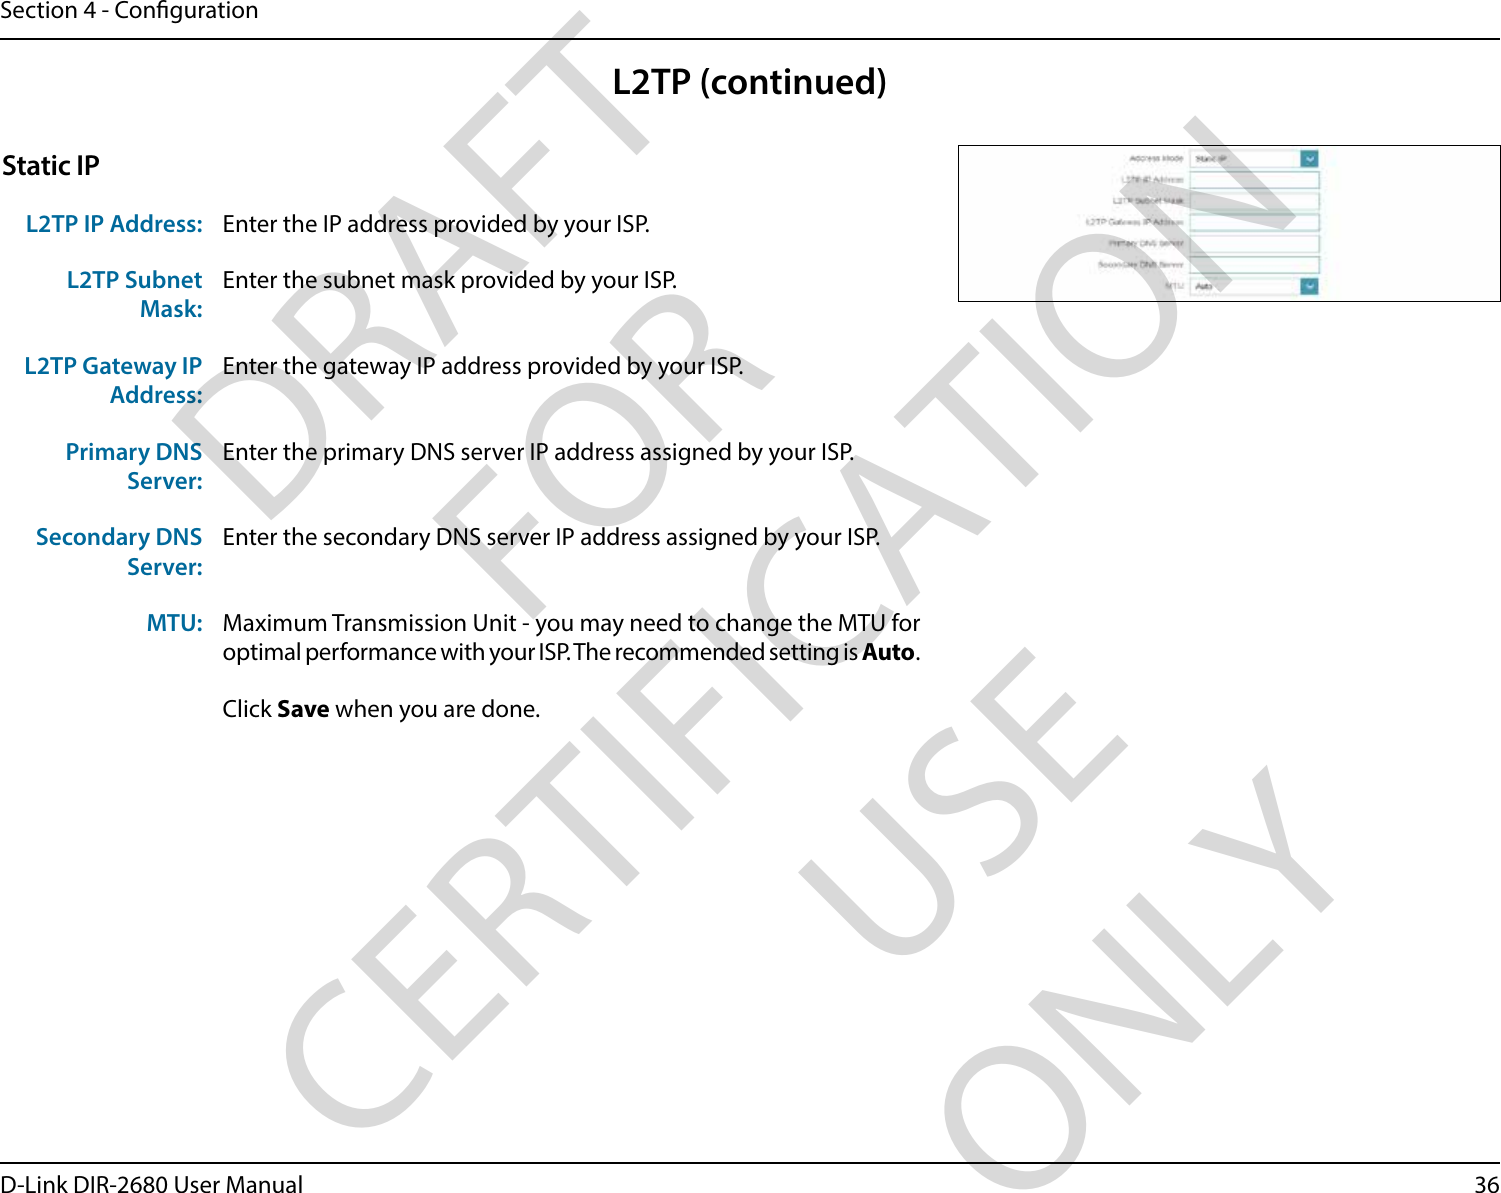 36D-Link DIR-2680 User ManualSection 4 - CongurationStatic IPL2TP IP Address: Enter the IP address provided by your ISP.L2TP Subnet Mask:Enter the subnet mask provided by your ISP.L2TP Gateway IP Address:Enter the gateway IP address provided by your ISP.Primary DNS Server:Enter the primary DNS server IP address assigned by your ISP.Secondary DNS Server:Enter the secondary DNS server IP address assigned by your ISP.MTU: Maximum Transmission Unit - you may need to change the MTU for optimal performance with your ISP. The recommended setting is Auto.Click Save when you are done.L2TP (continued)DRAFT FOR CERTIFICATION USE ONLY